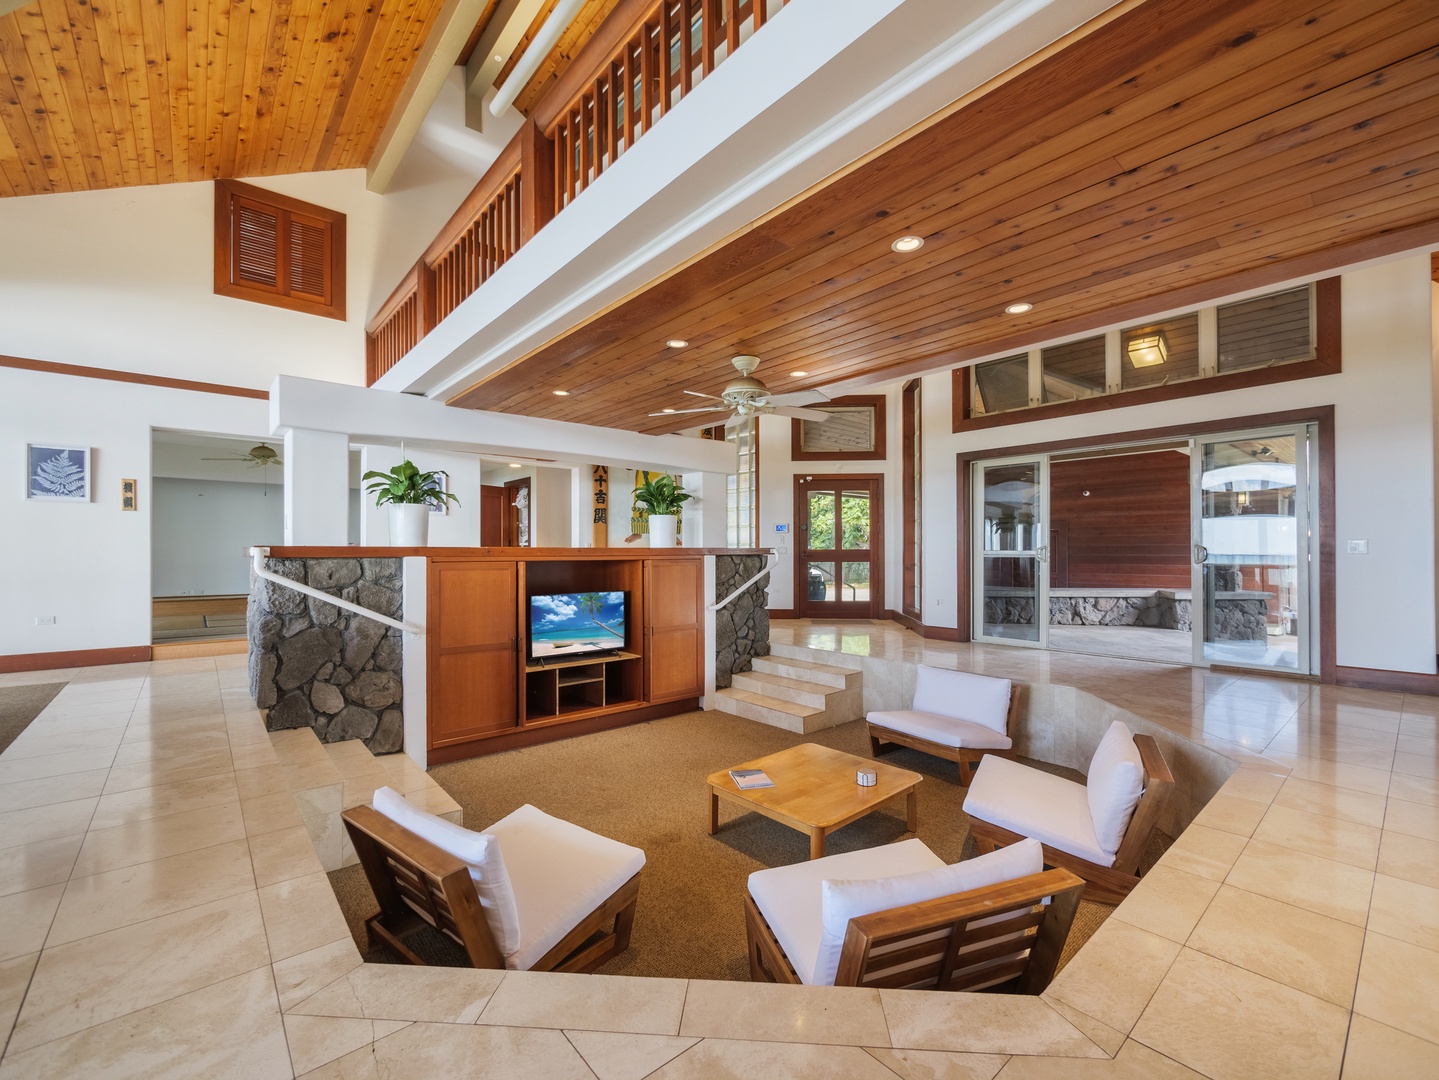 Waianae Vacation Rentals, Konishiki Beachhouse - Cozy sunken living space with wood accents and modern amenities for family entertainment.